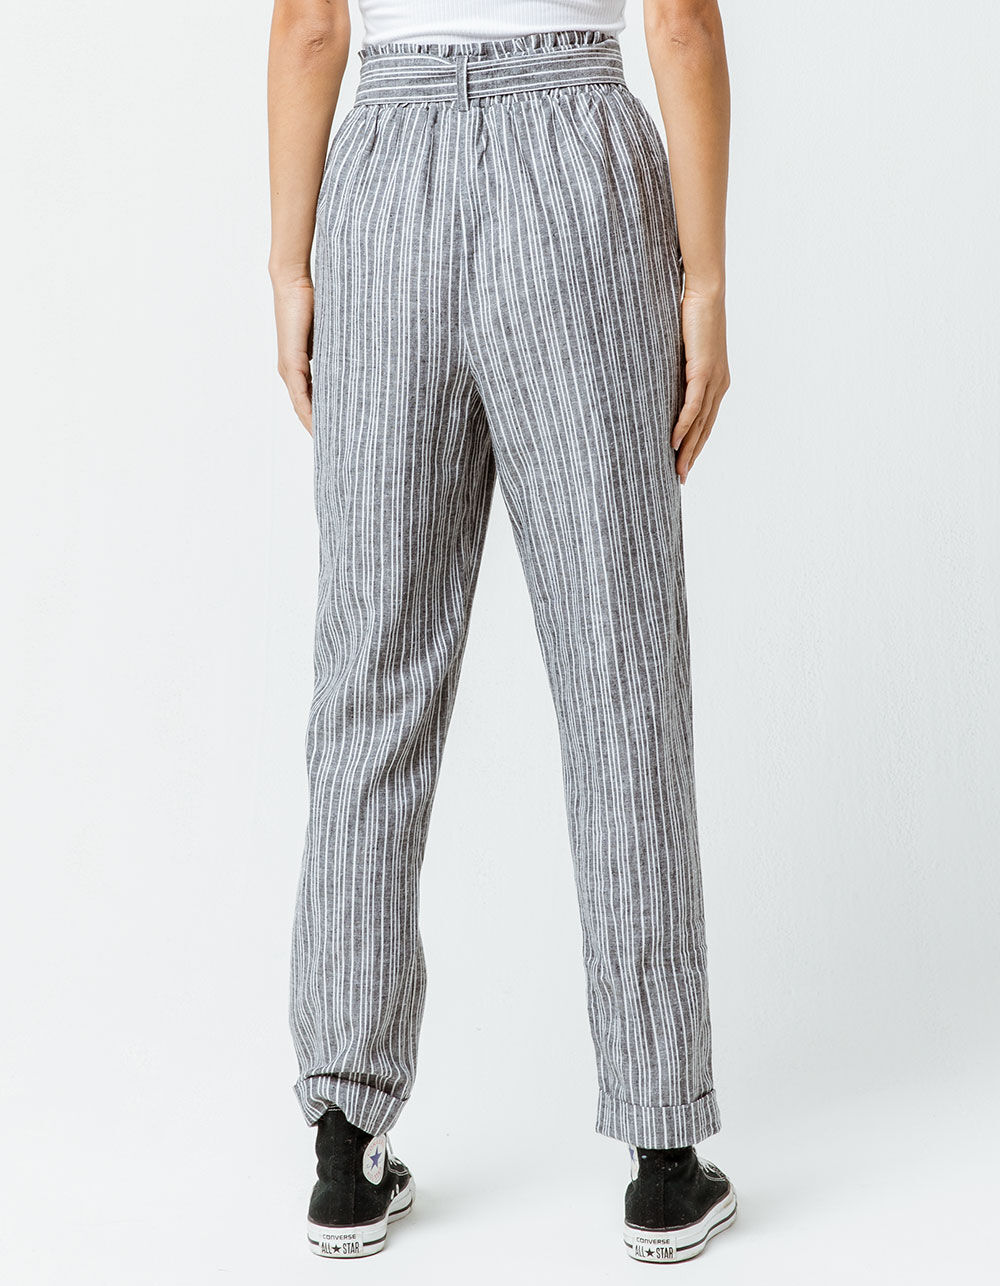 SKY AND SPARROW Stripe Paperbag Waist Womens Trouser Pants image number 2